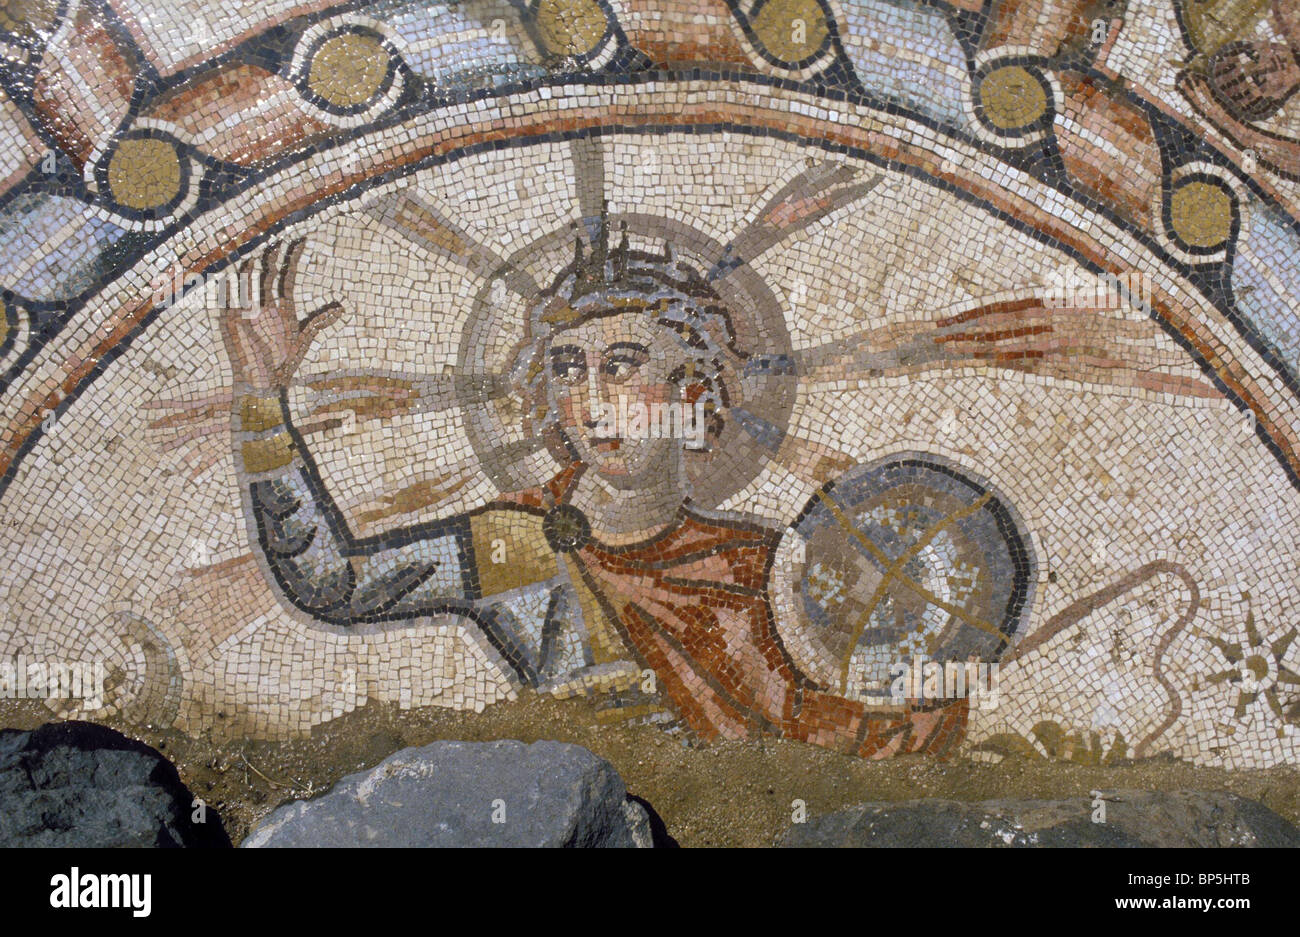 3306. MOSAIC FLOOR FROM THE 5TH. C. SYNAGOGUE IN TIBERIAS DETAIL DEPICTING HELIOS, THE GREEK SUN-GOD, Stock Photo